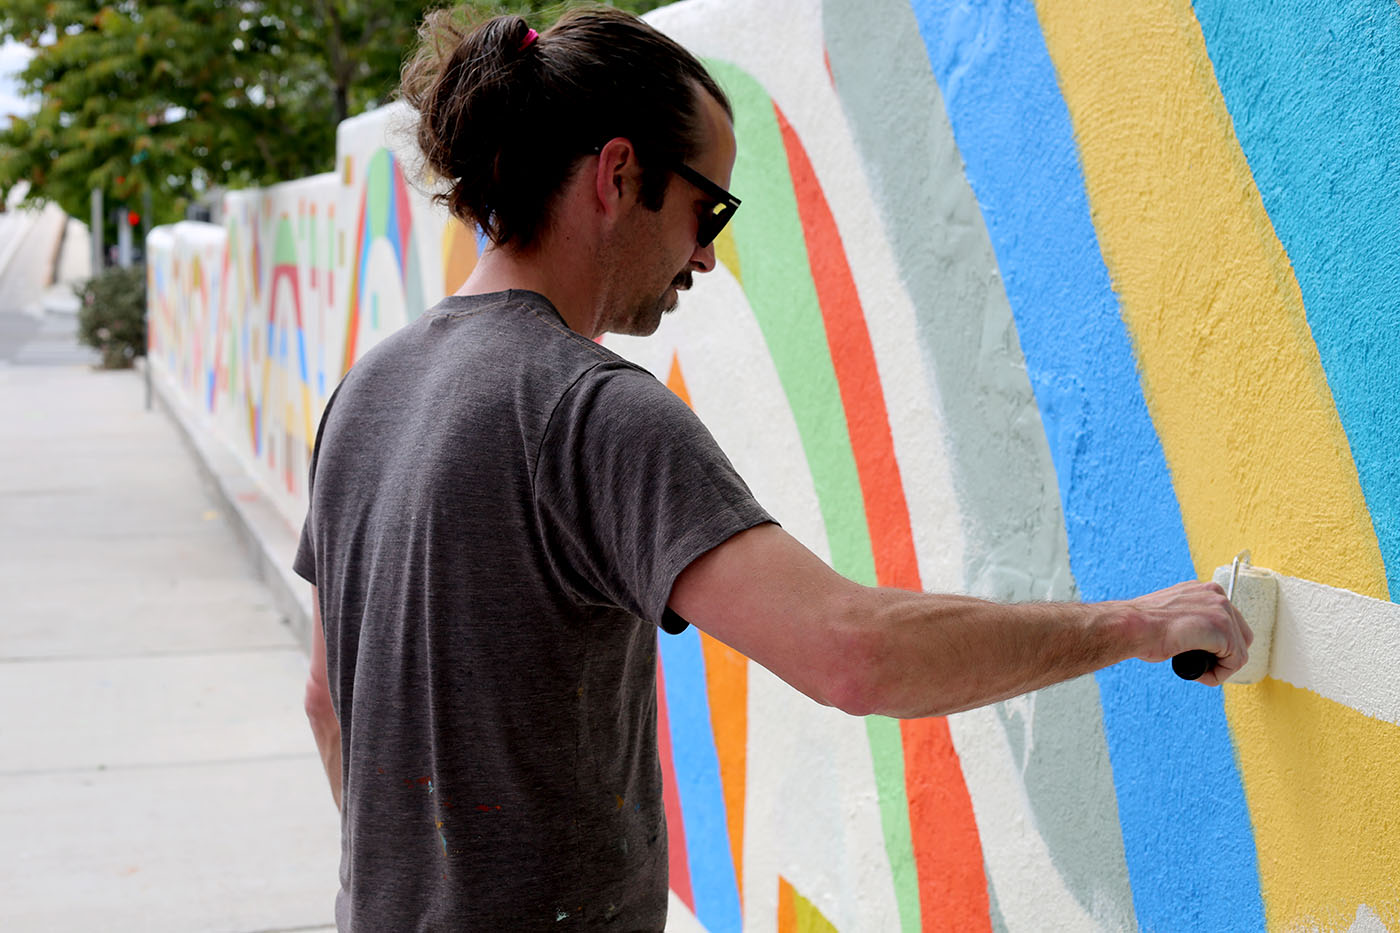 Photo of the pony-tailed artist in sunglasses painting a mural in progress.